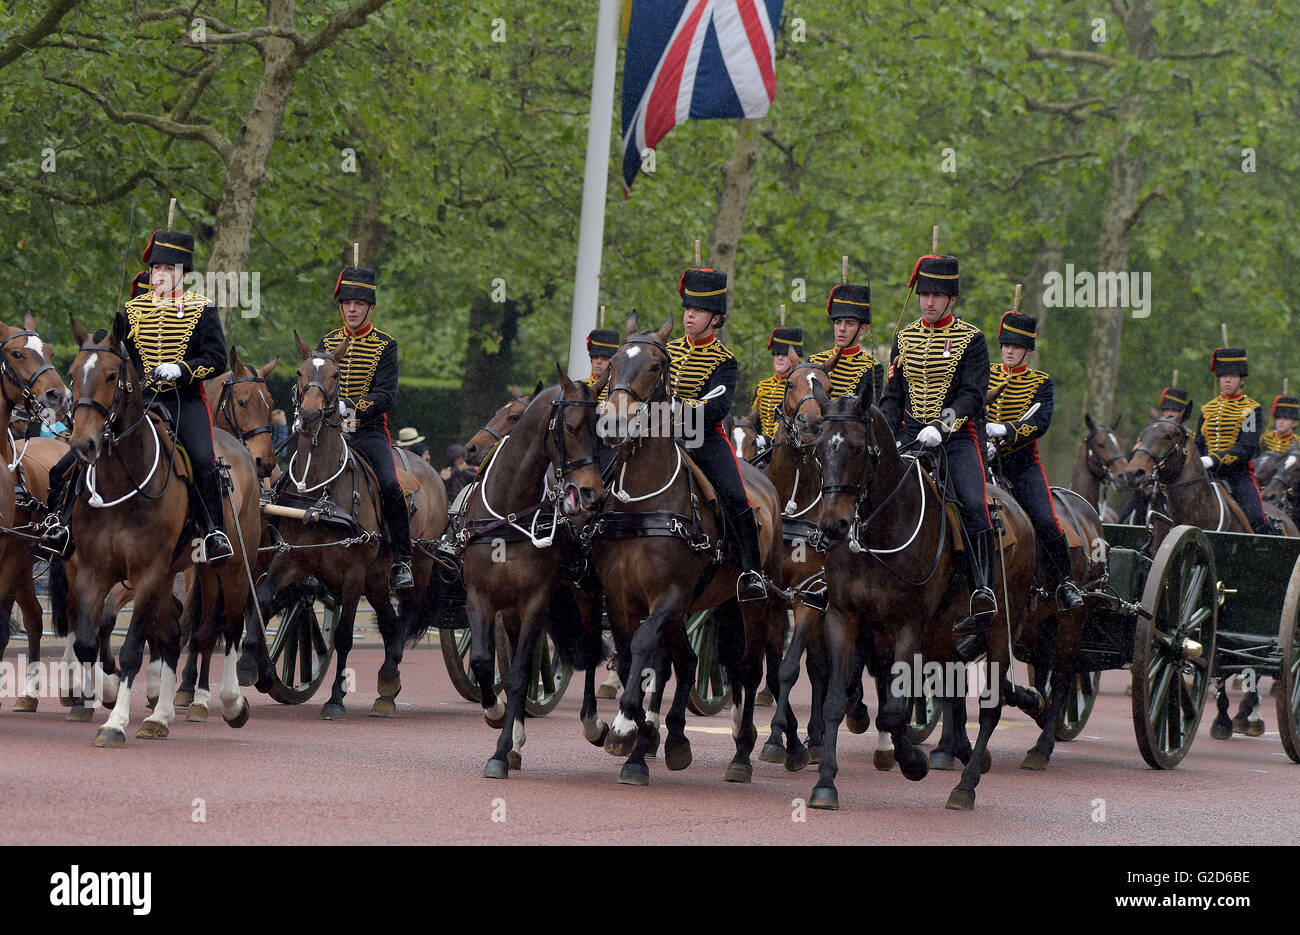 London, UK. 28th May, 2016.Major General E.A. Smyth-Osborne, CBE Major General commanding the household division and general officer commanding London district, takes the salute at the Major General's review. The review is held two weeks before the Trooping the colour and Queens birthday parade and is a full dress rehearsal for Trooping the colour. 28th May 2016 Credit:  MARTIN DALTON/Alamy Live News Stock Photo